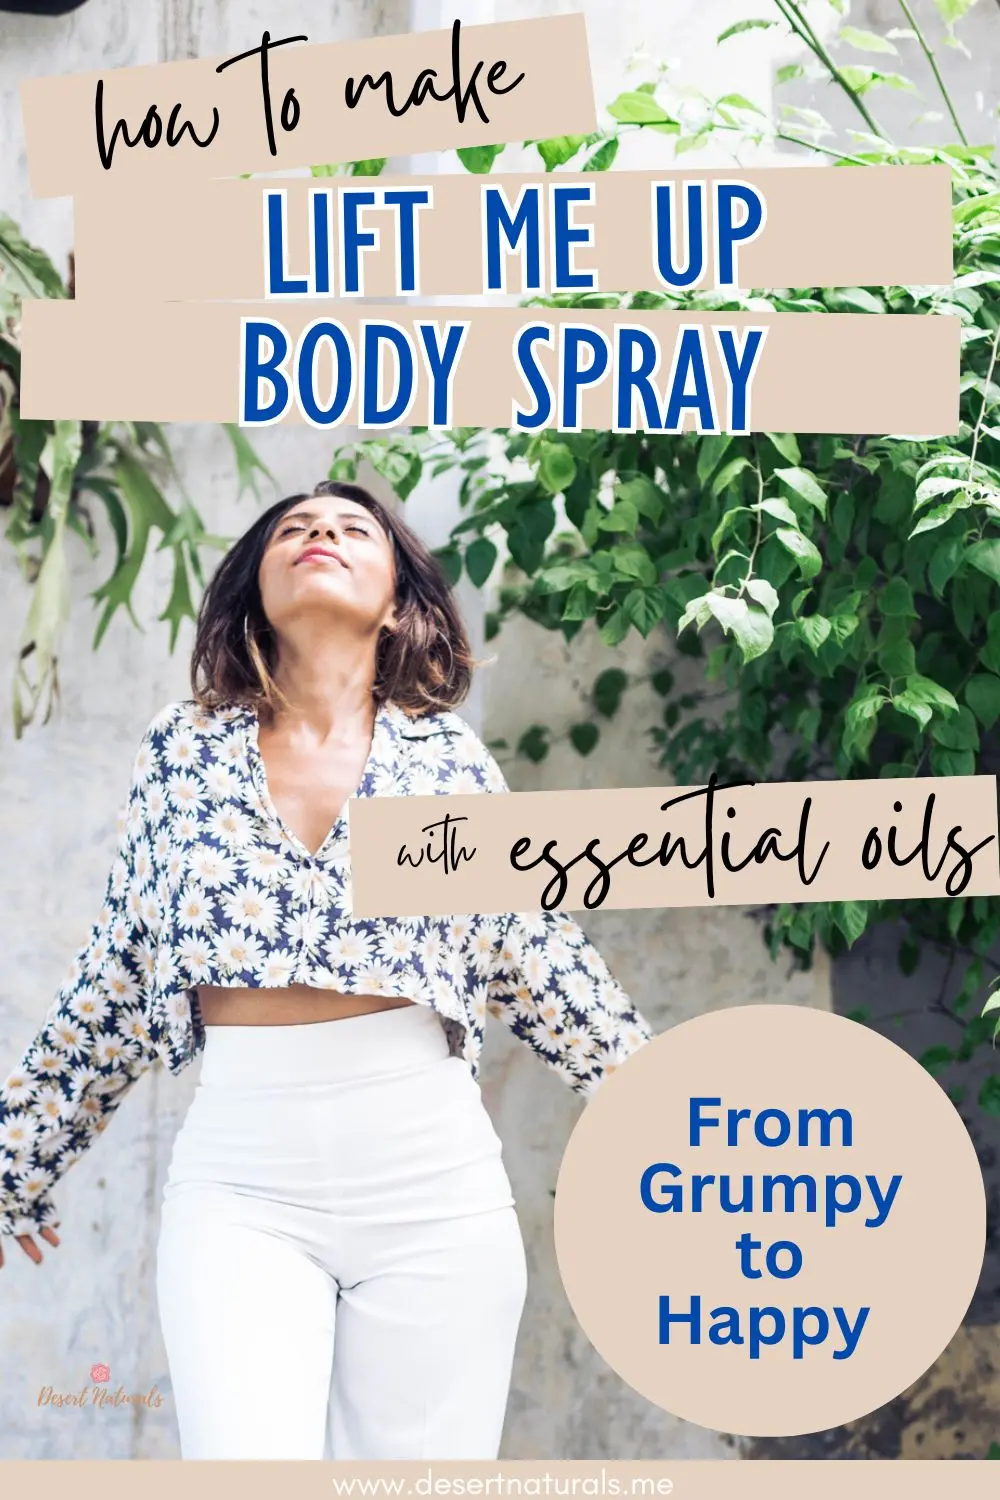 Happy Woman with Text for Lift Me Up Body Spray with essential oils to go from grumpy to happy